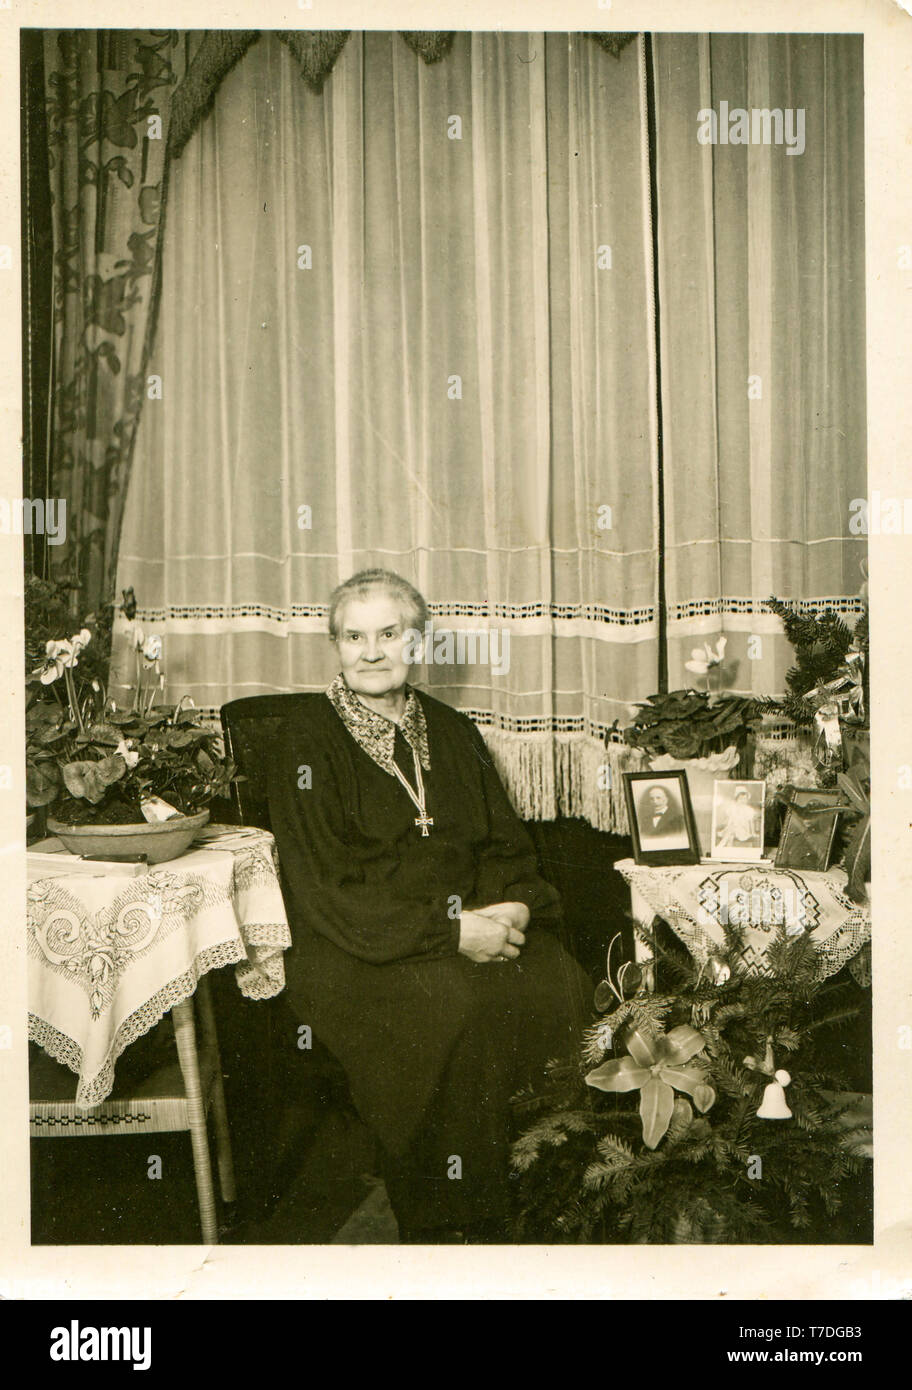 Elderly woman celebrates Christmas. On the table is a portrait of a deceased husband and portreya family. Germany 1940s. Stock Photo